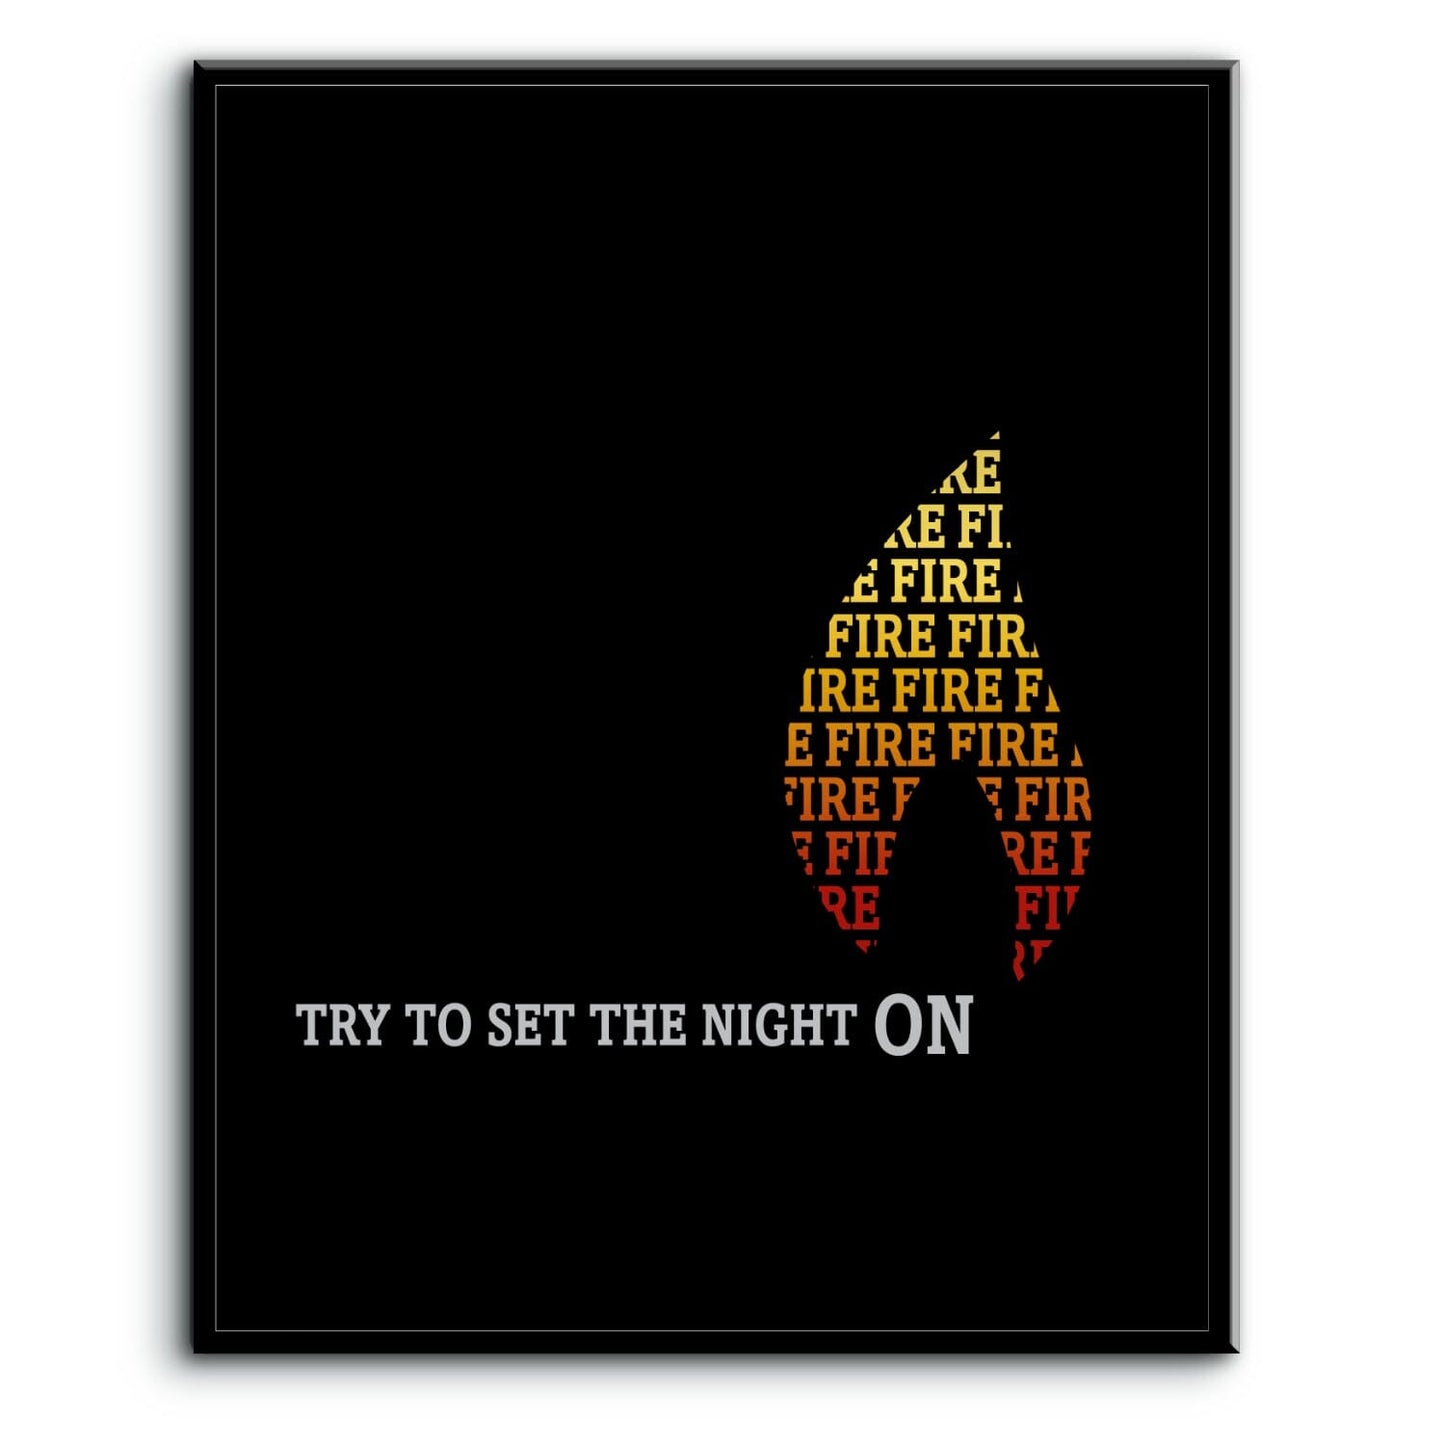 Light my Fire by The Doors - 60s Song Lyric Music Poster Art Song Lyrics Art Song Lyrics Art 8x10 Plaque Mount 